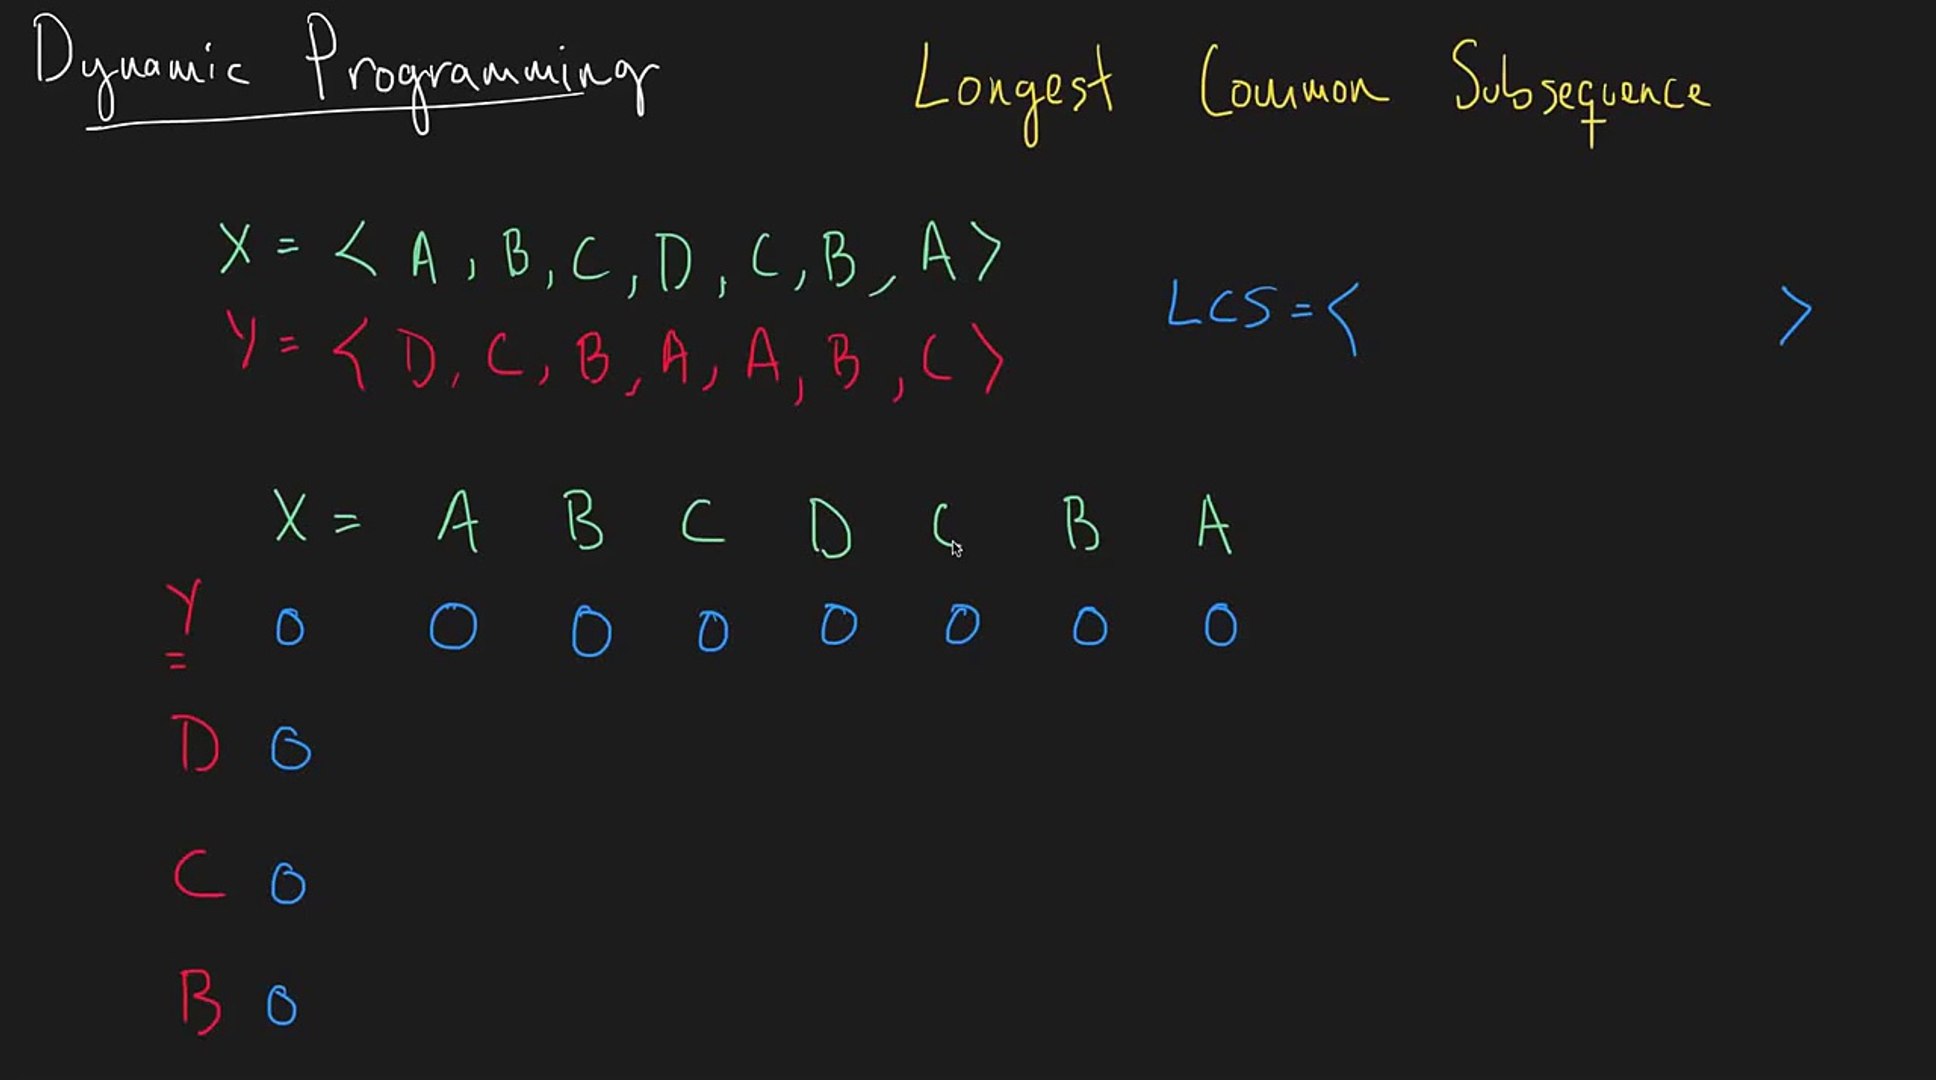 Dynamic Programming - Longest Common Subsequence